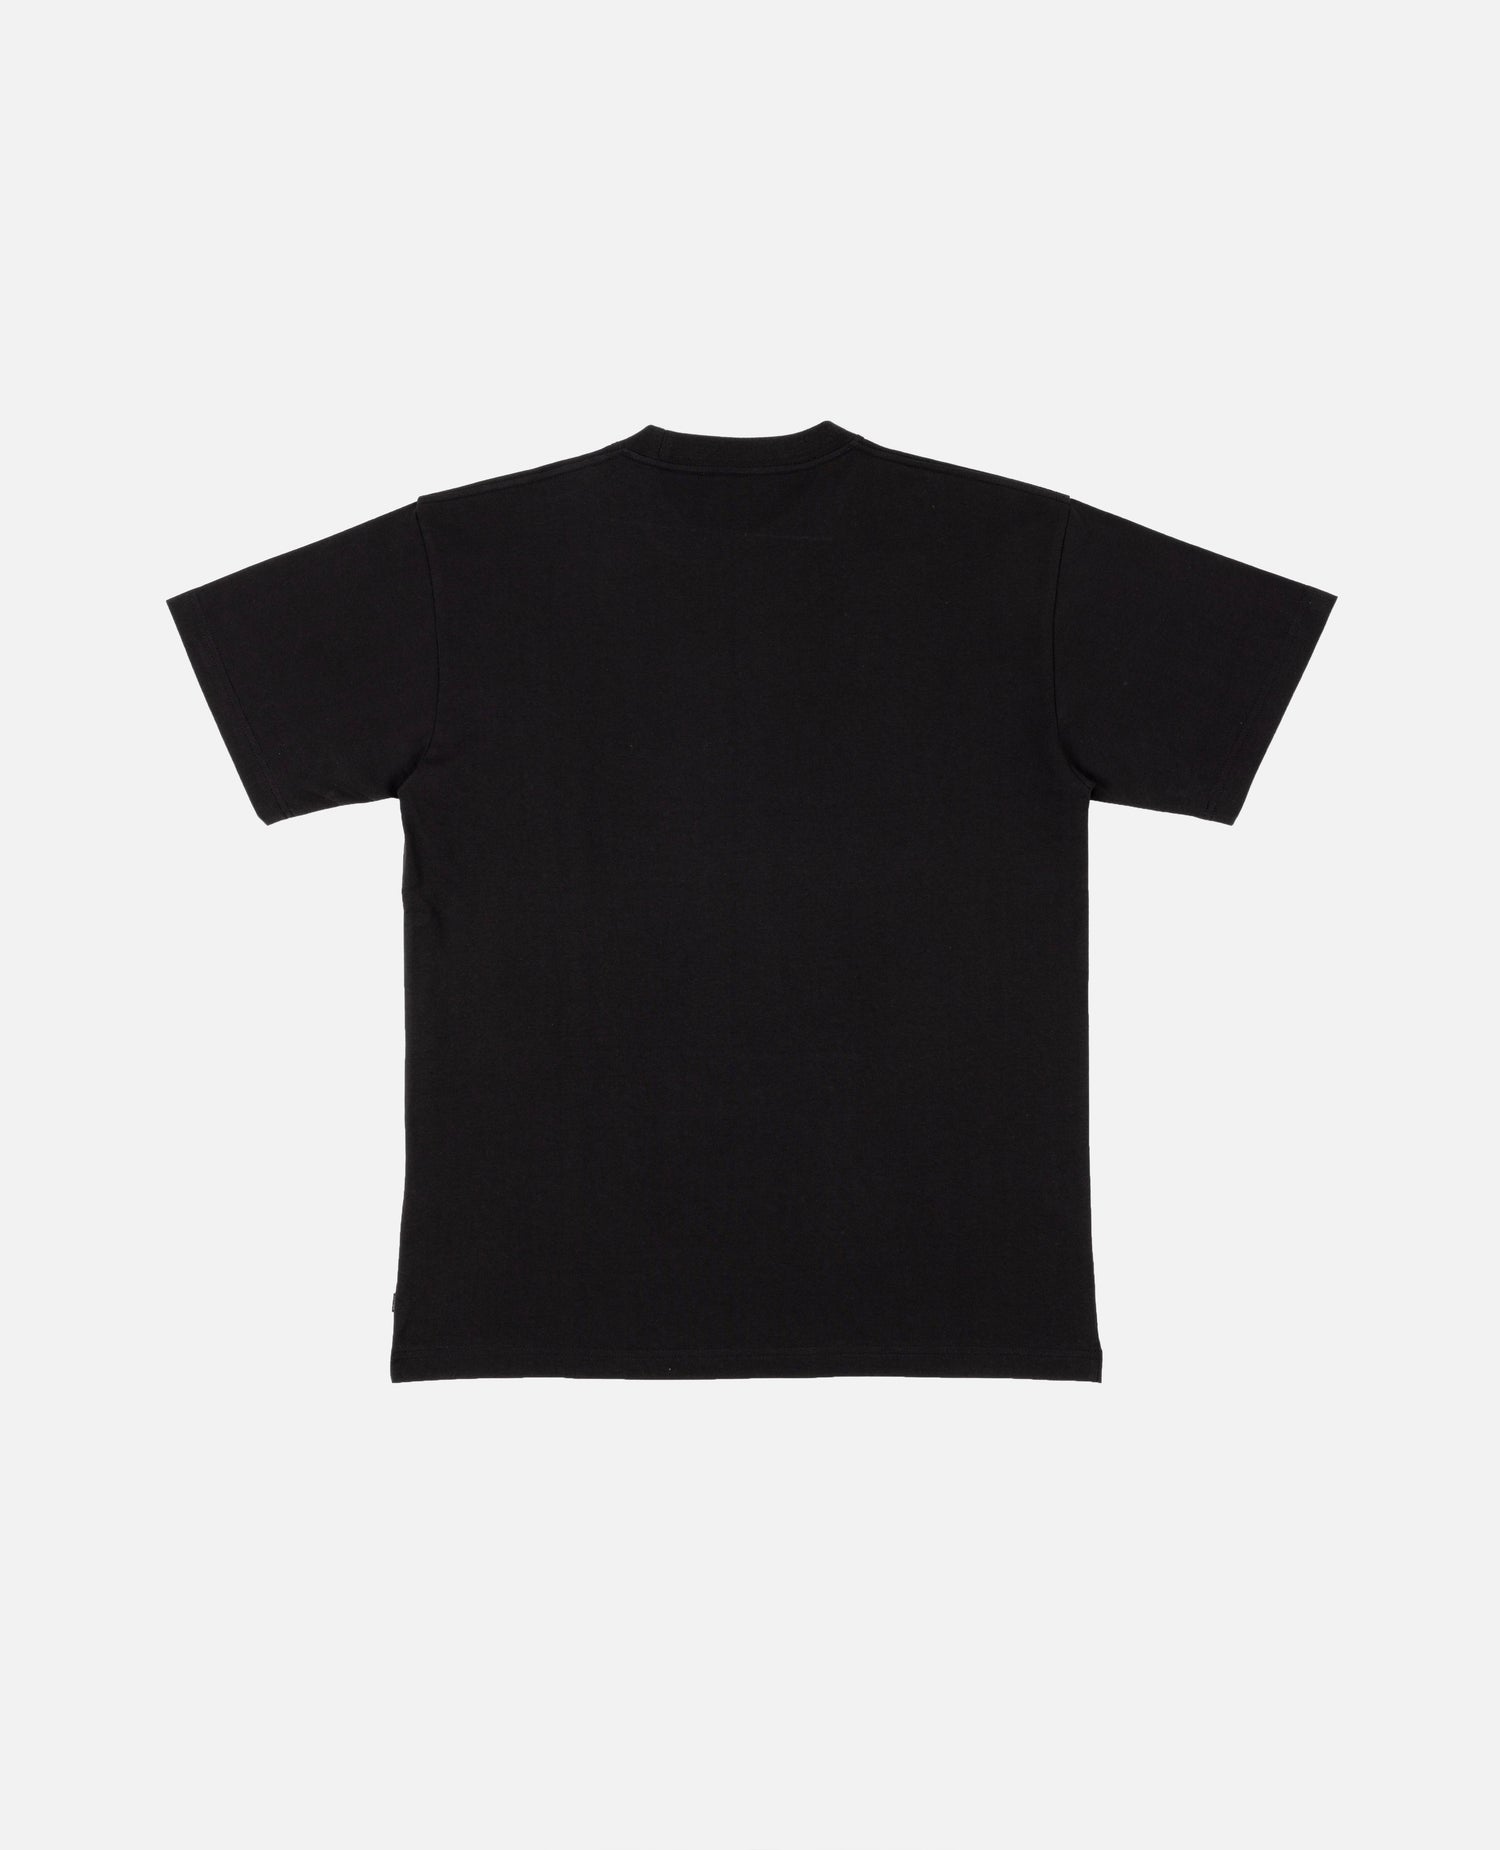 Patta Forever And Always T-Shirt (Black)